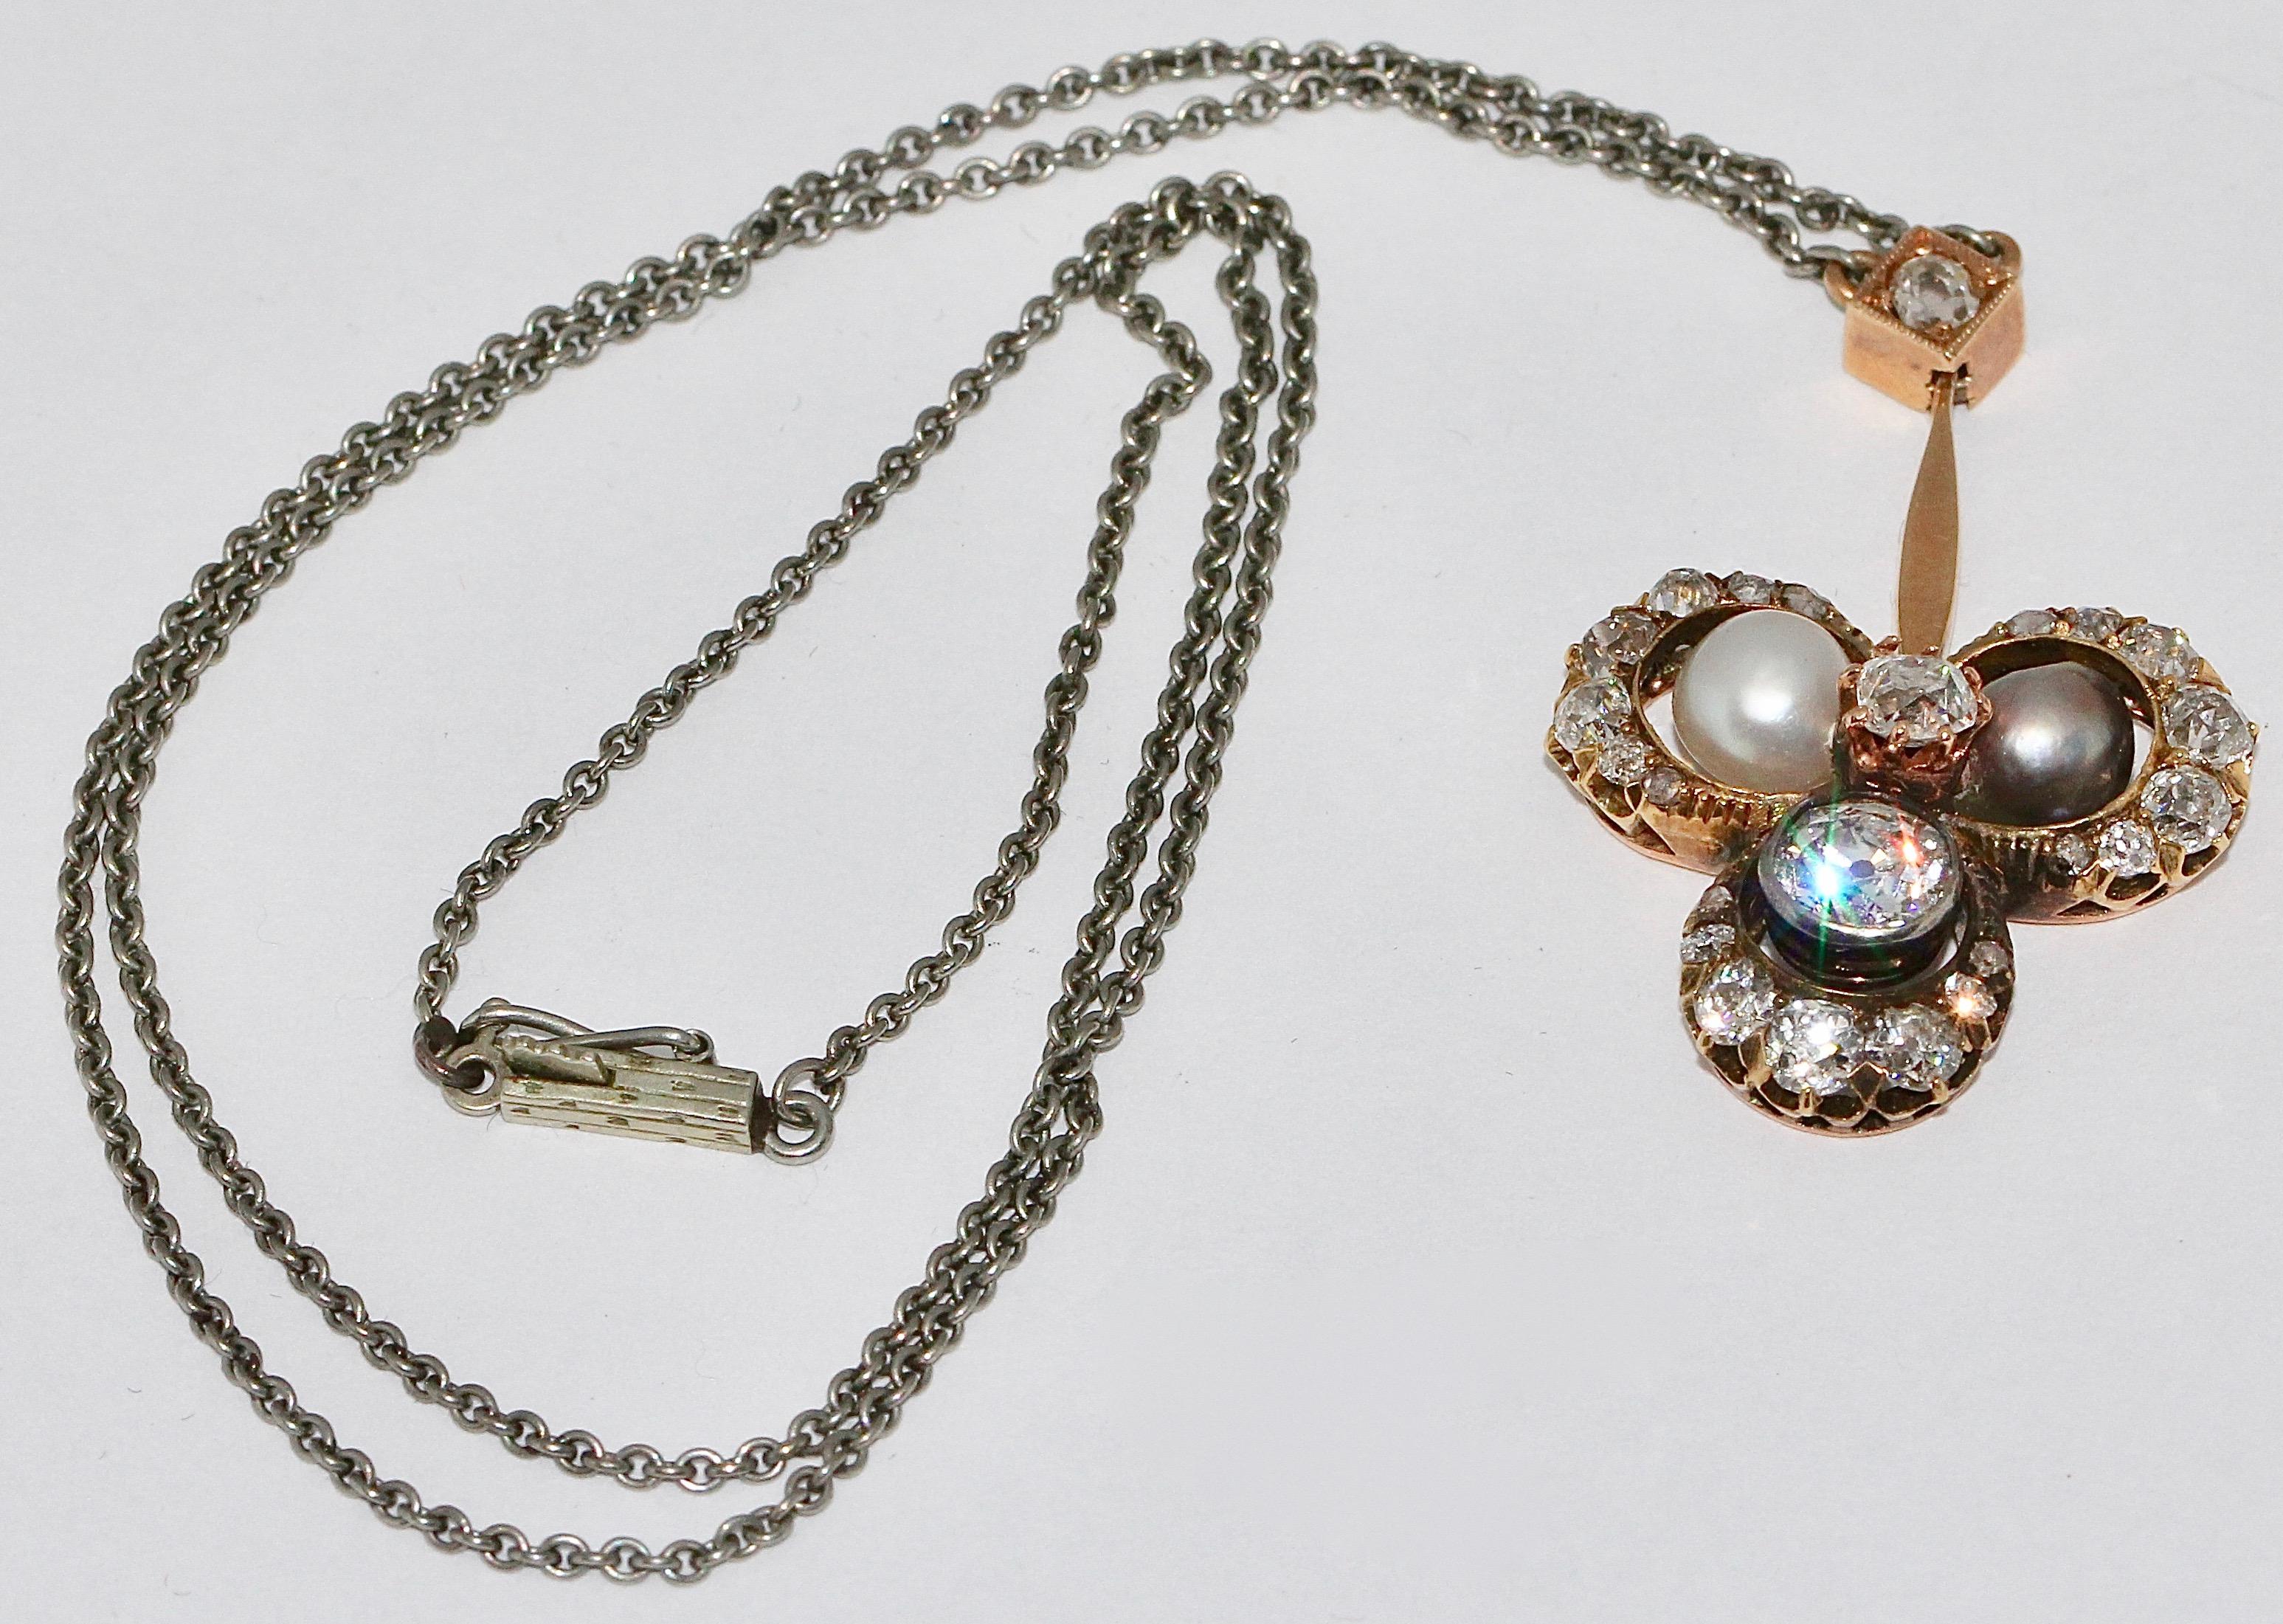 Antique Art Nouveau Gold Necklace, Pendant, with Diamonds and Natural Pearls For Sale 3